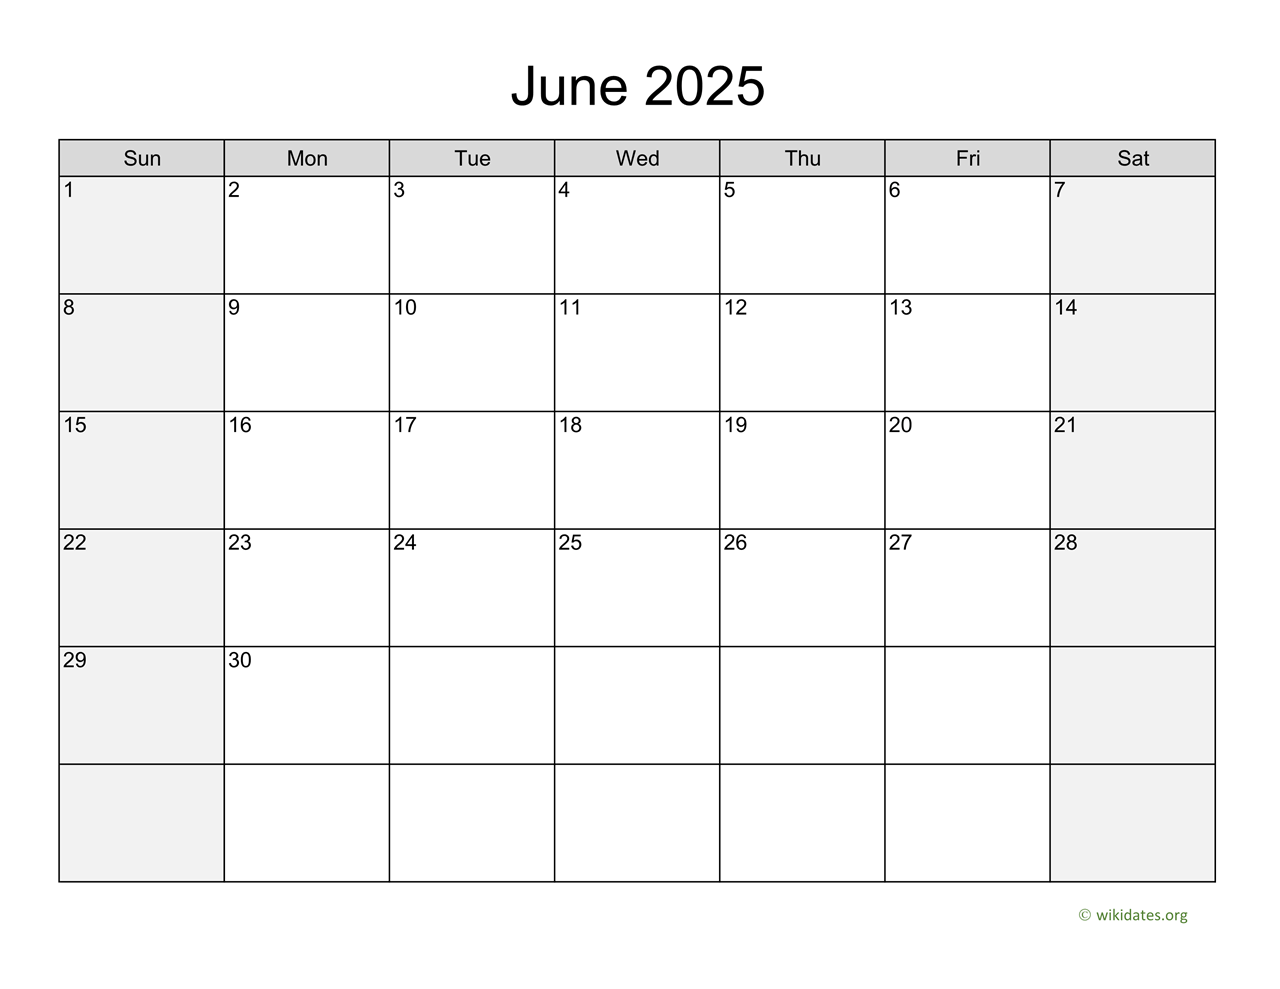 june-2025-calendar-with-weekend-shaded-wikidates